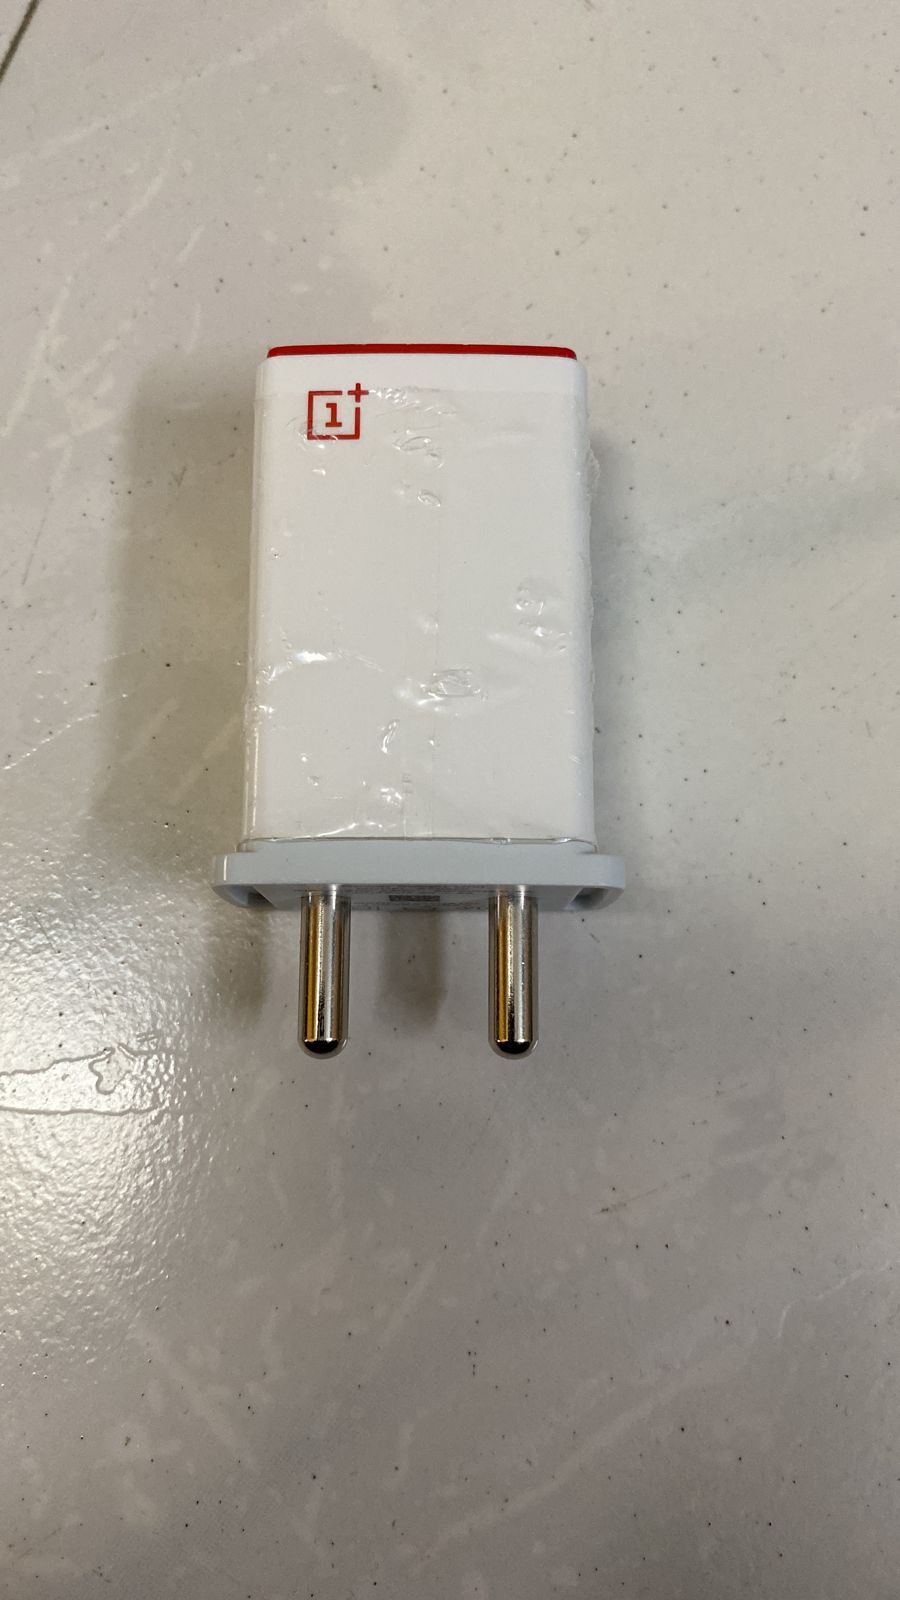 [UnBelievable Deal] ONEPLUS WALL CHARGER AY0520 2000MAH WHITE UNIVERSAL BULK-Chargers-dealsplant